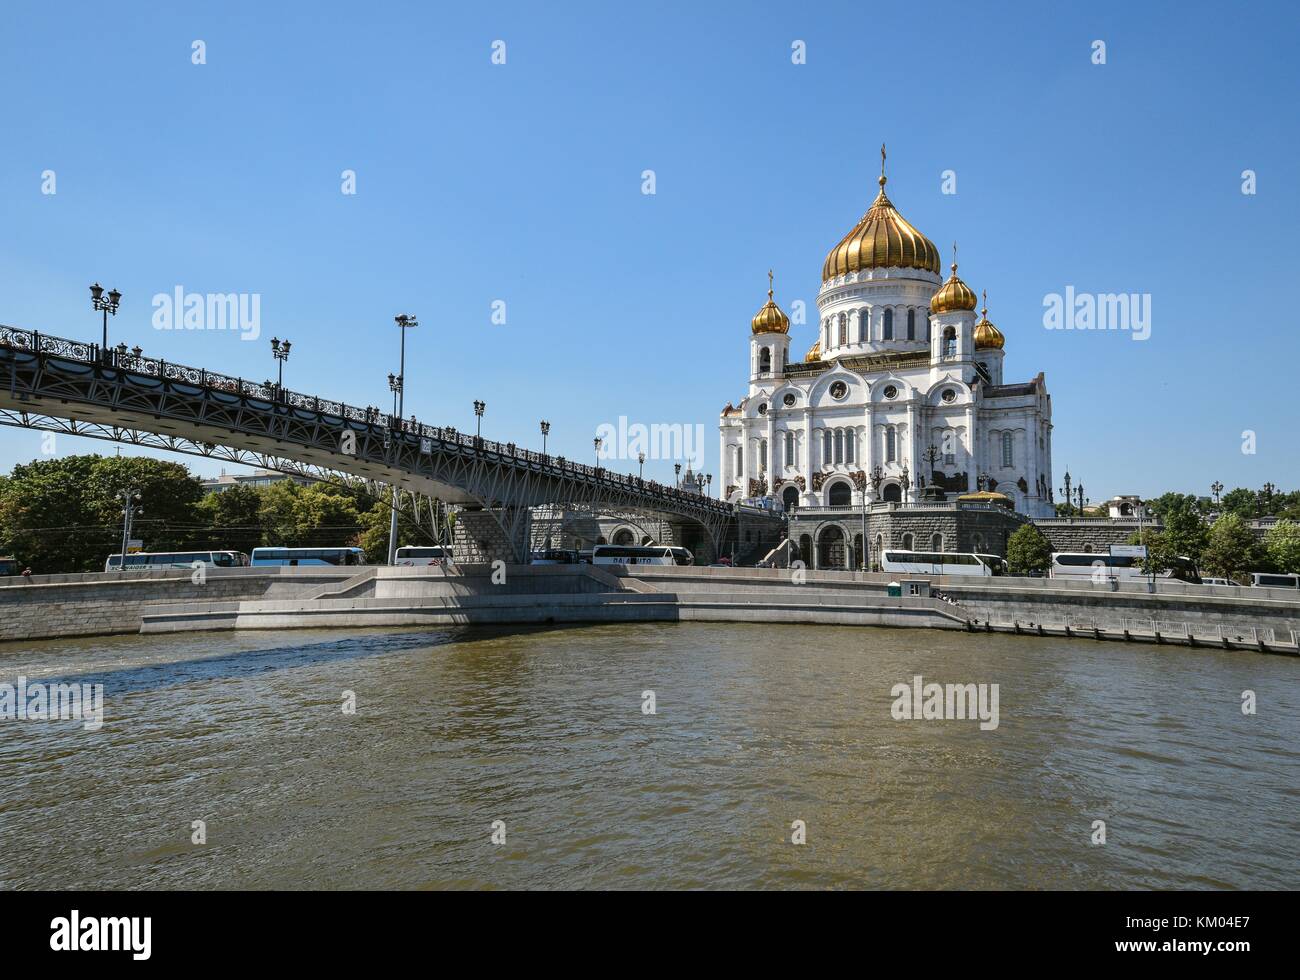 The Cathedral of Christ the Savior in Moscow, Russia Stock Photo